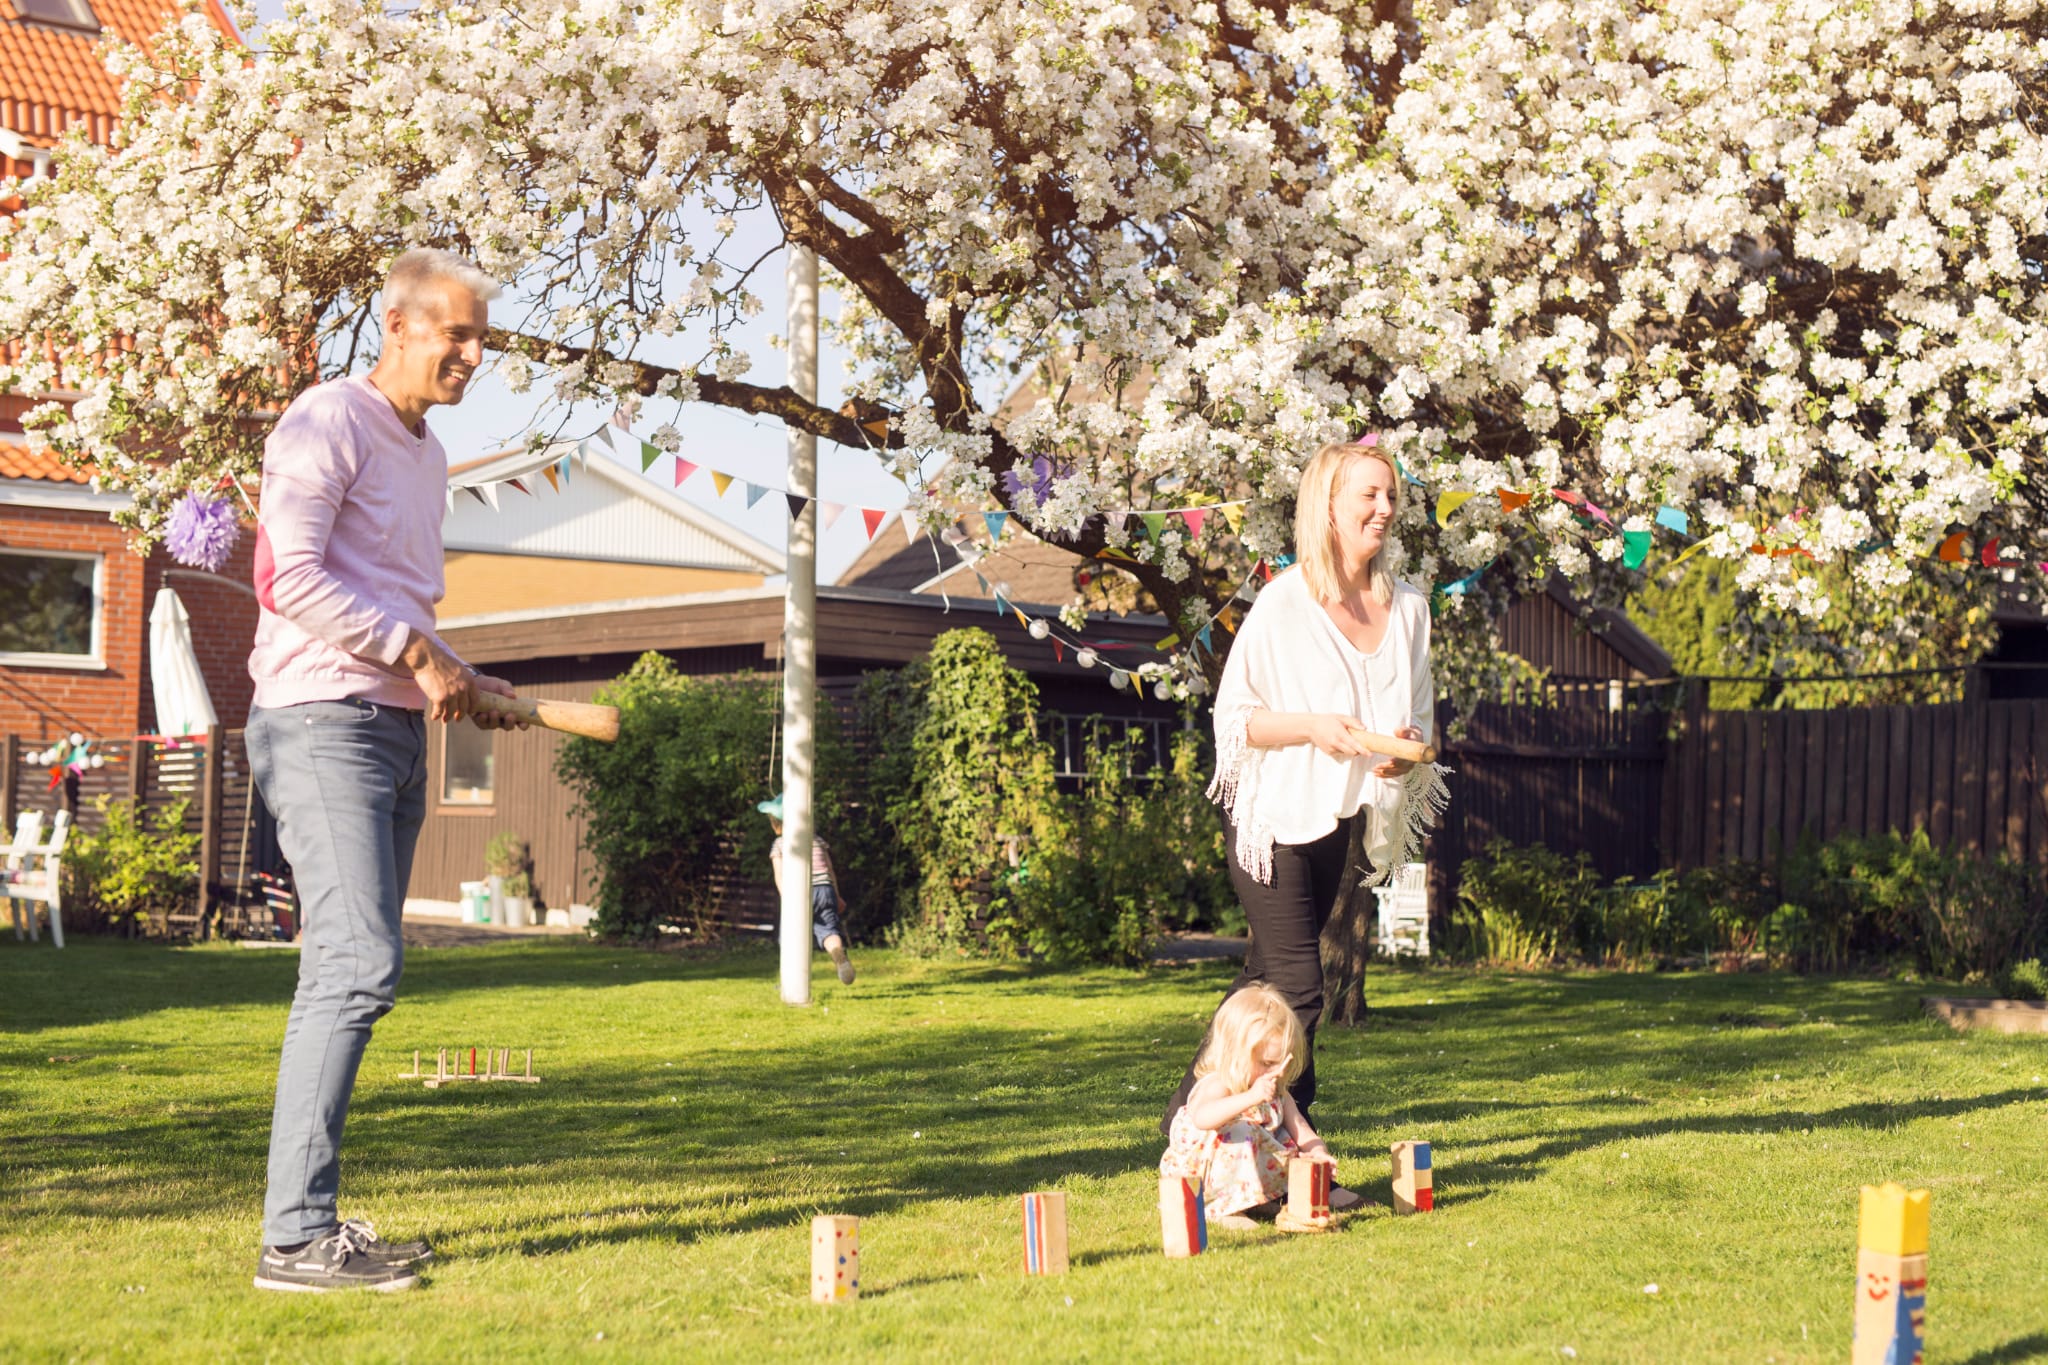 A portable camping game perfect for the whole family, kubb is a fun summer game to play